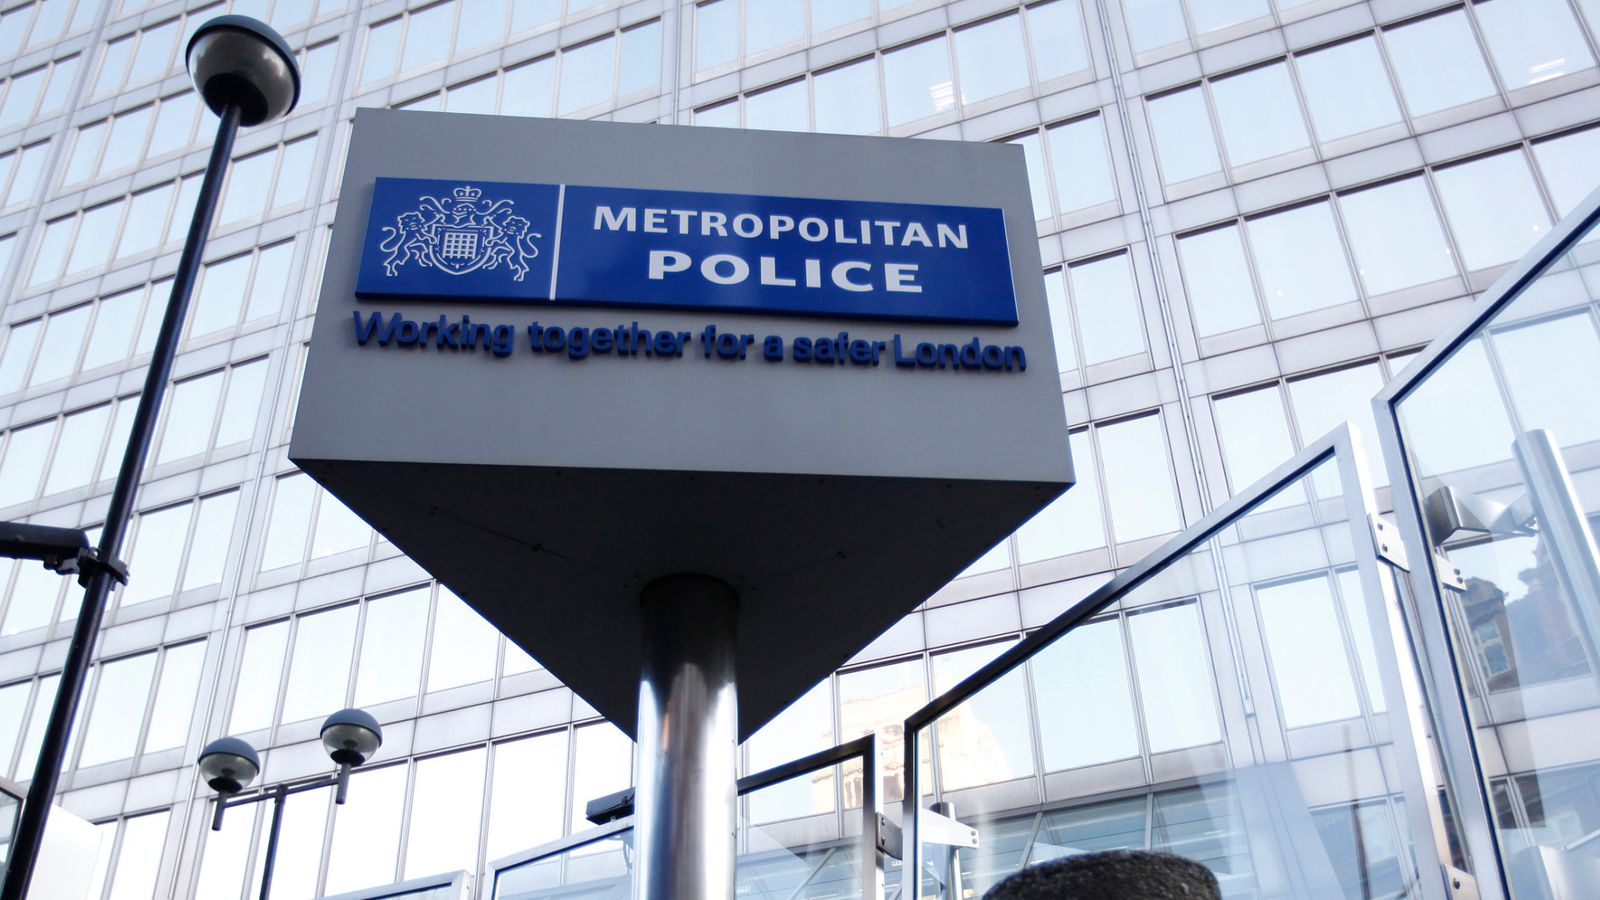 Two Met Police officers sacked over 'discriminatory and offensive' WhatsApp messages